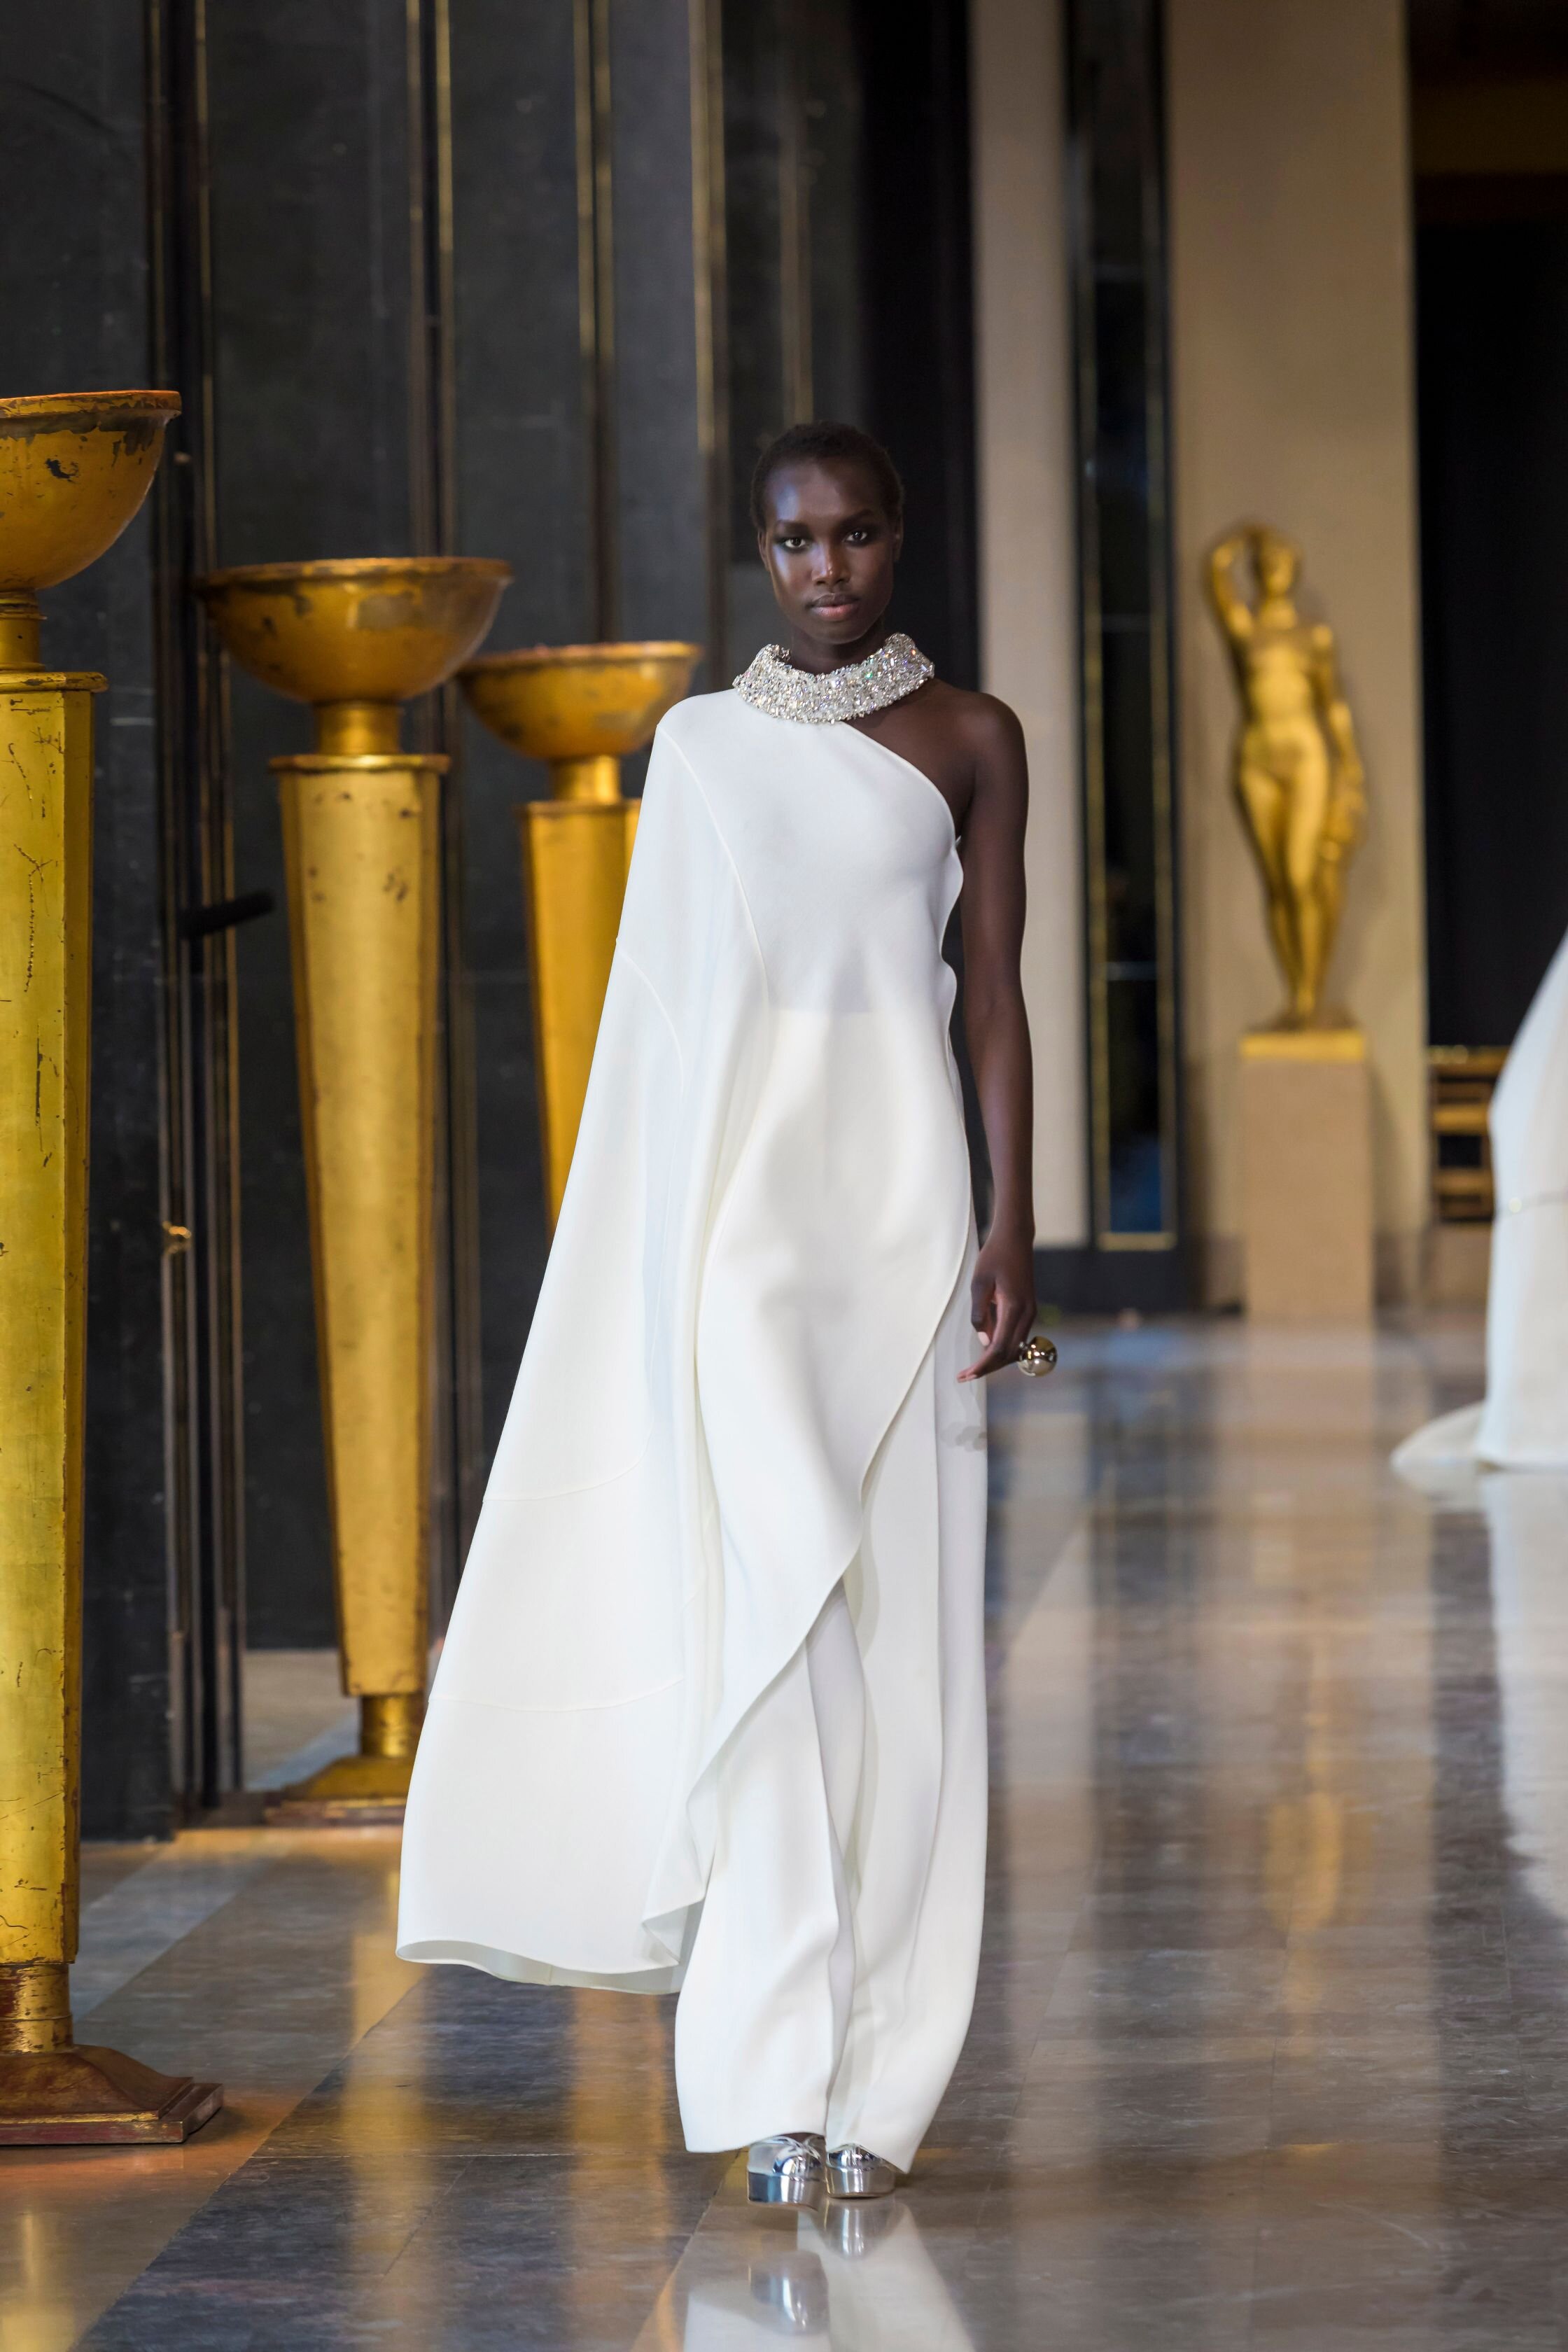 Spring 2020 Haute Couture: Stephane Rolland's Moonrise — CoutureNotebook